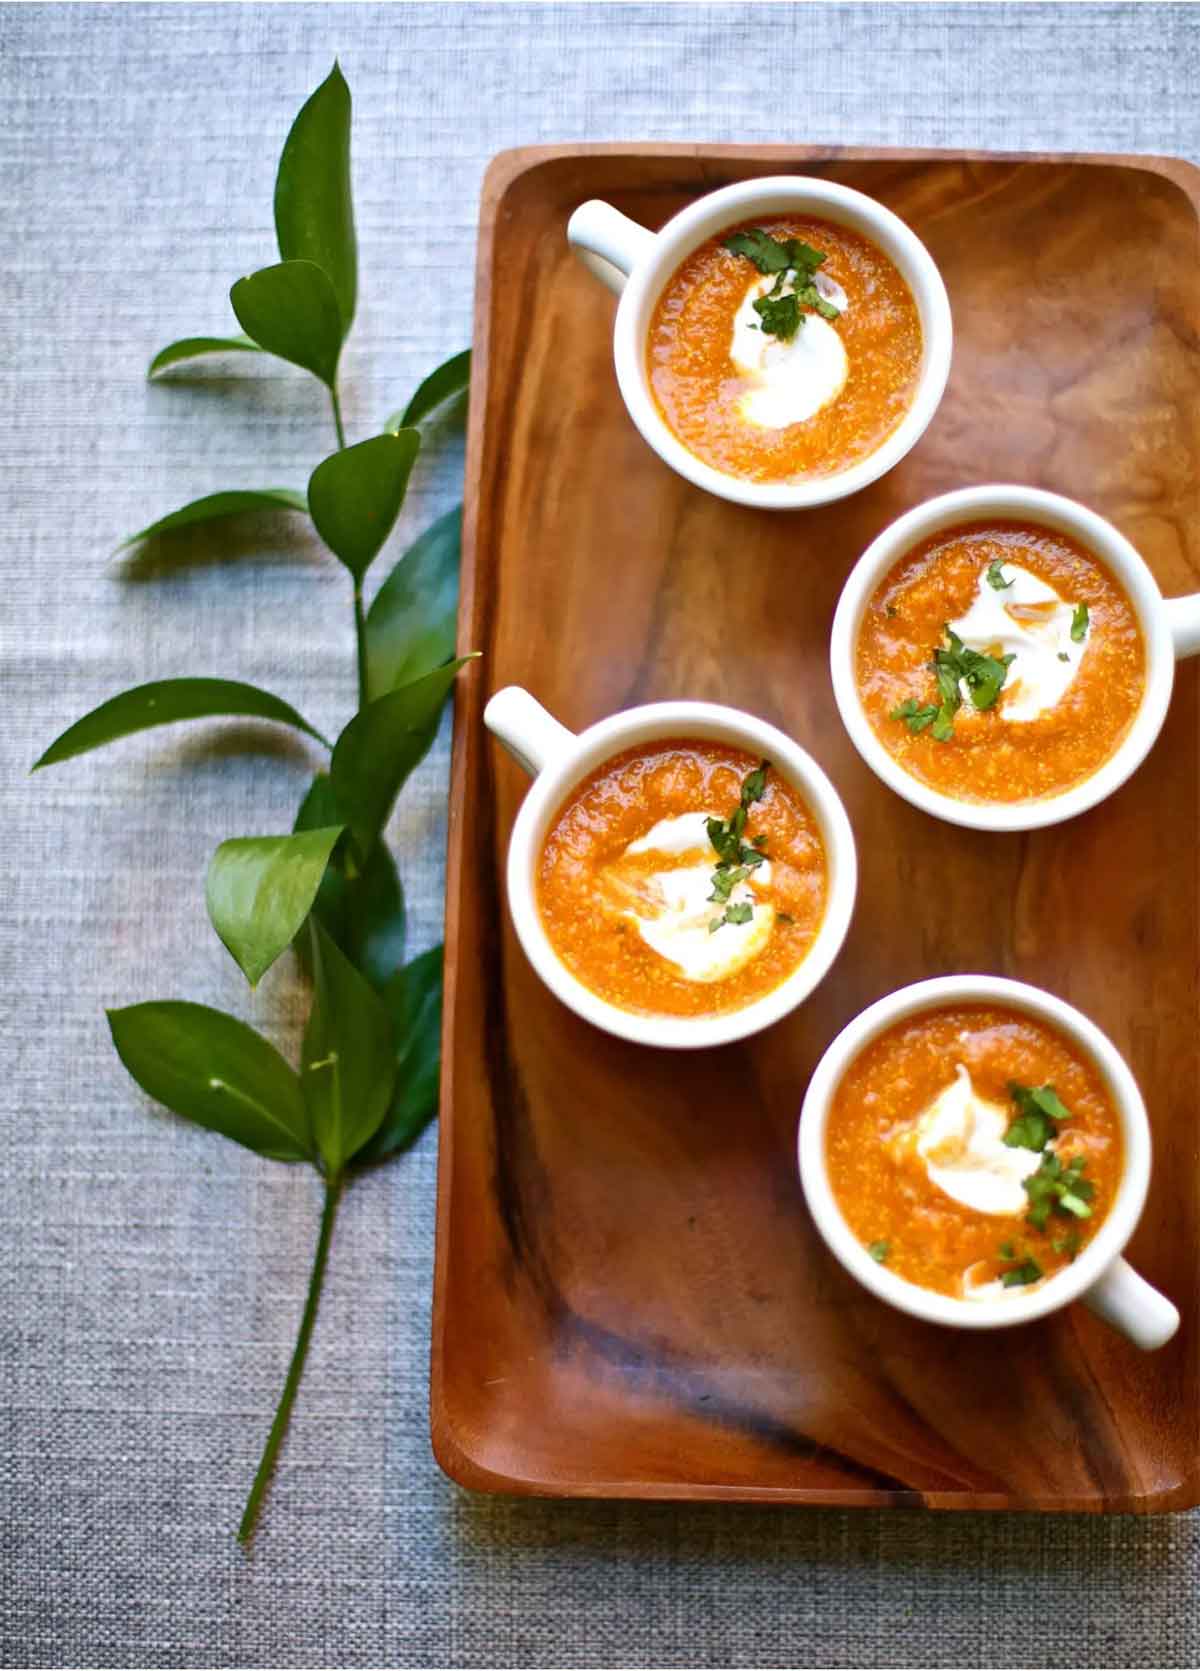 4 cups of pumpkin soup on a wooden tray on a table, beside a sprig of leaves.